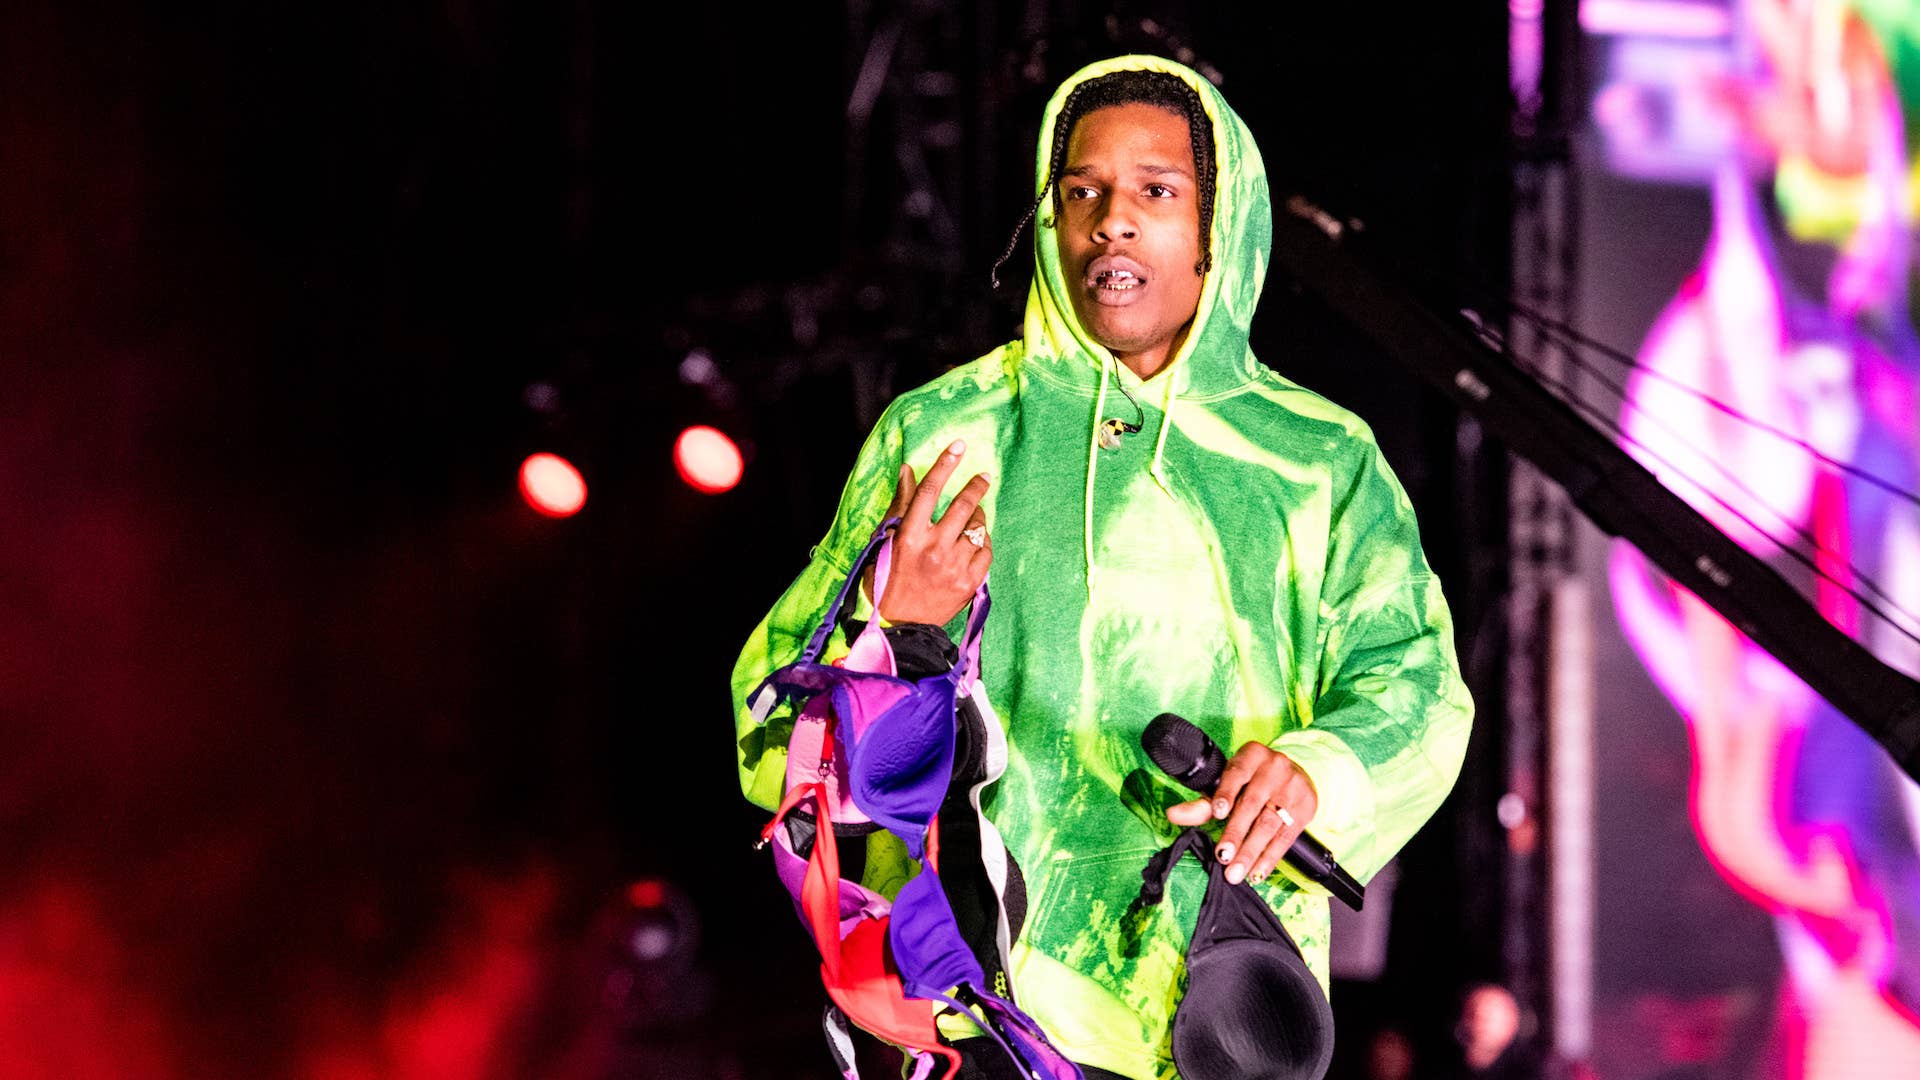 ASAP Rocky performs during 2019 Rolling Loud LA.